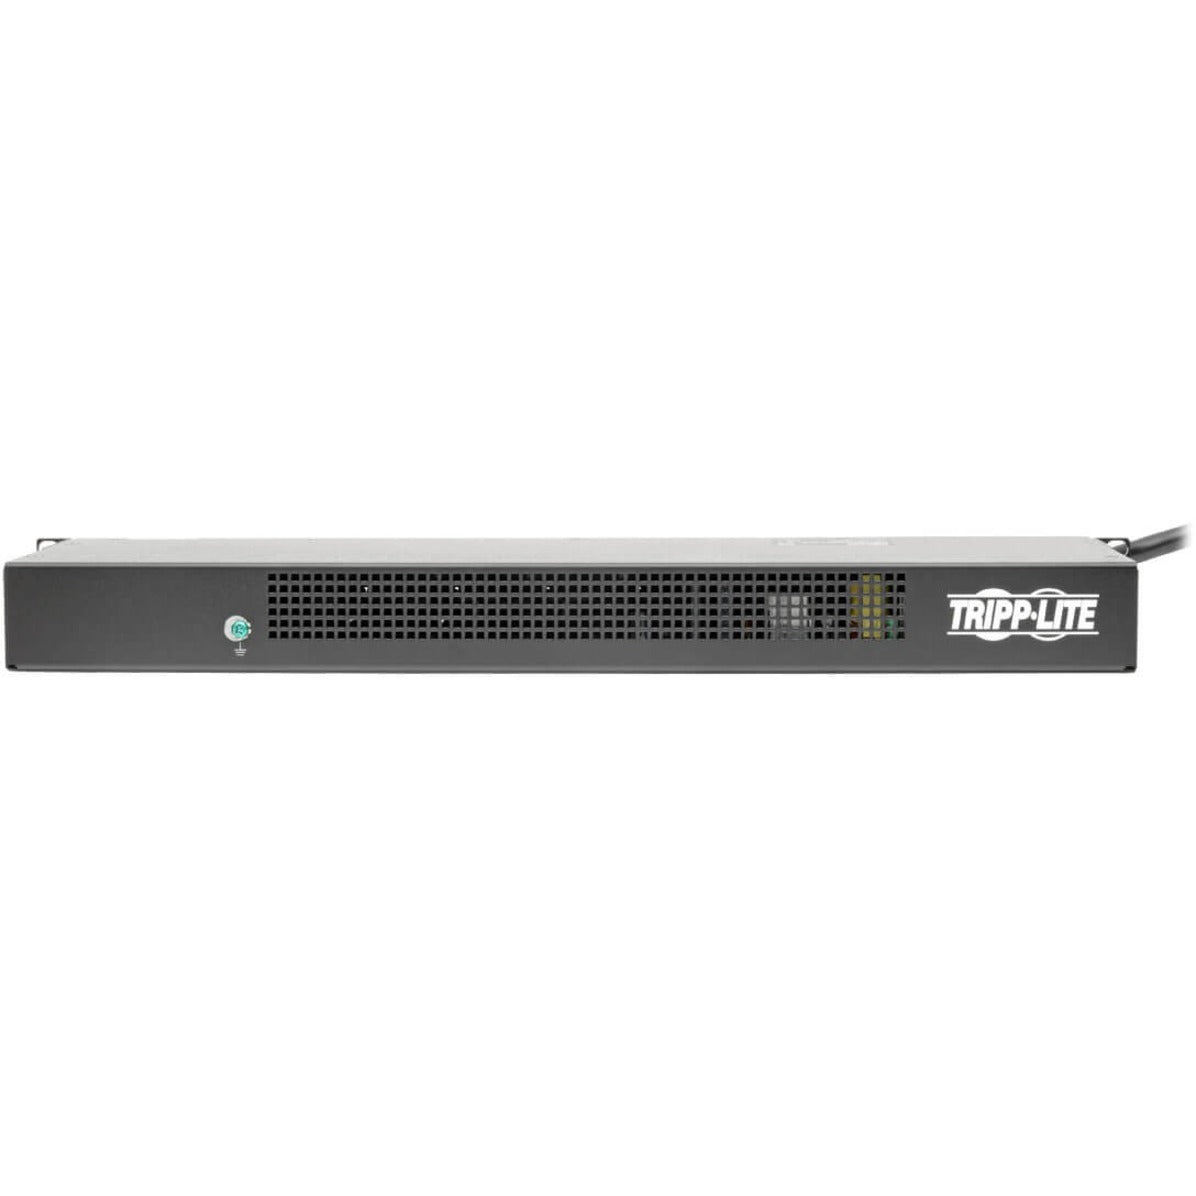 Tripp Lite PDUMH20NET2LX 1.9kW Single-Phase Switched PDU, Remote Outlet Switching, IPv4/IPv6 Management, 20A Input Current, 120V AC Power